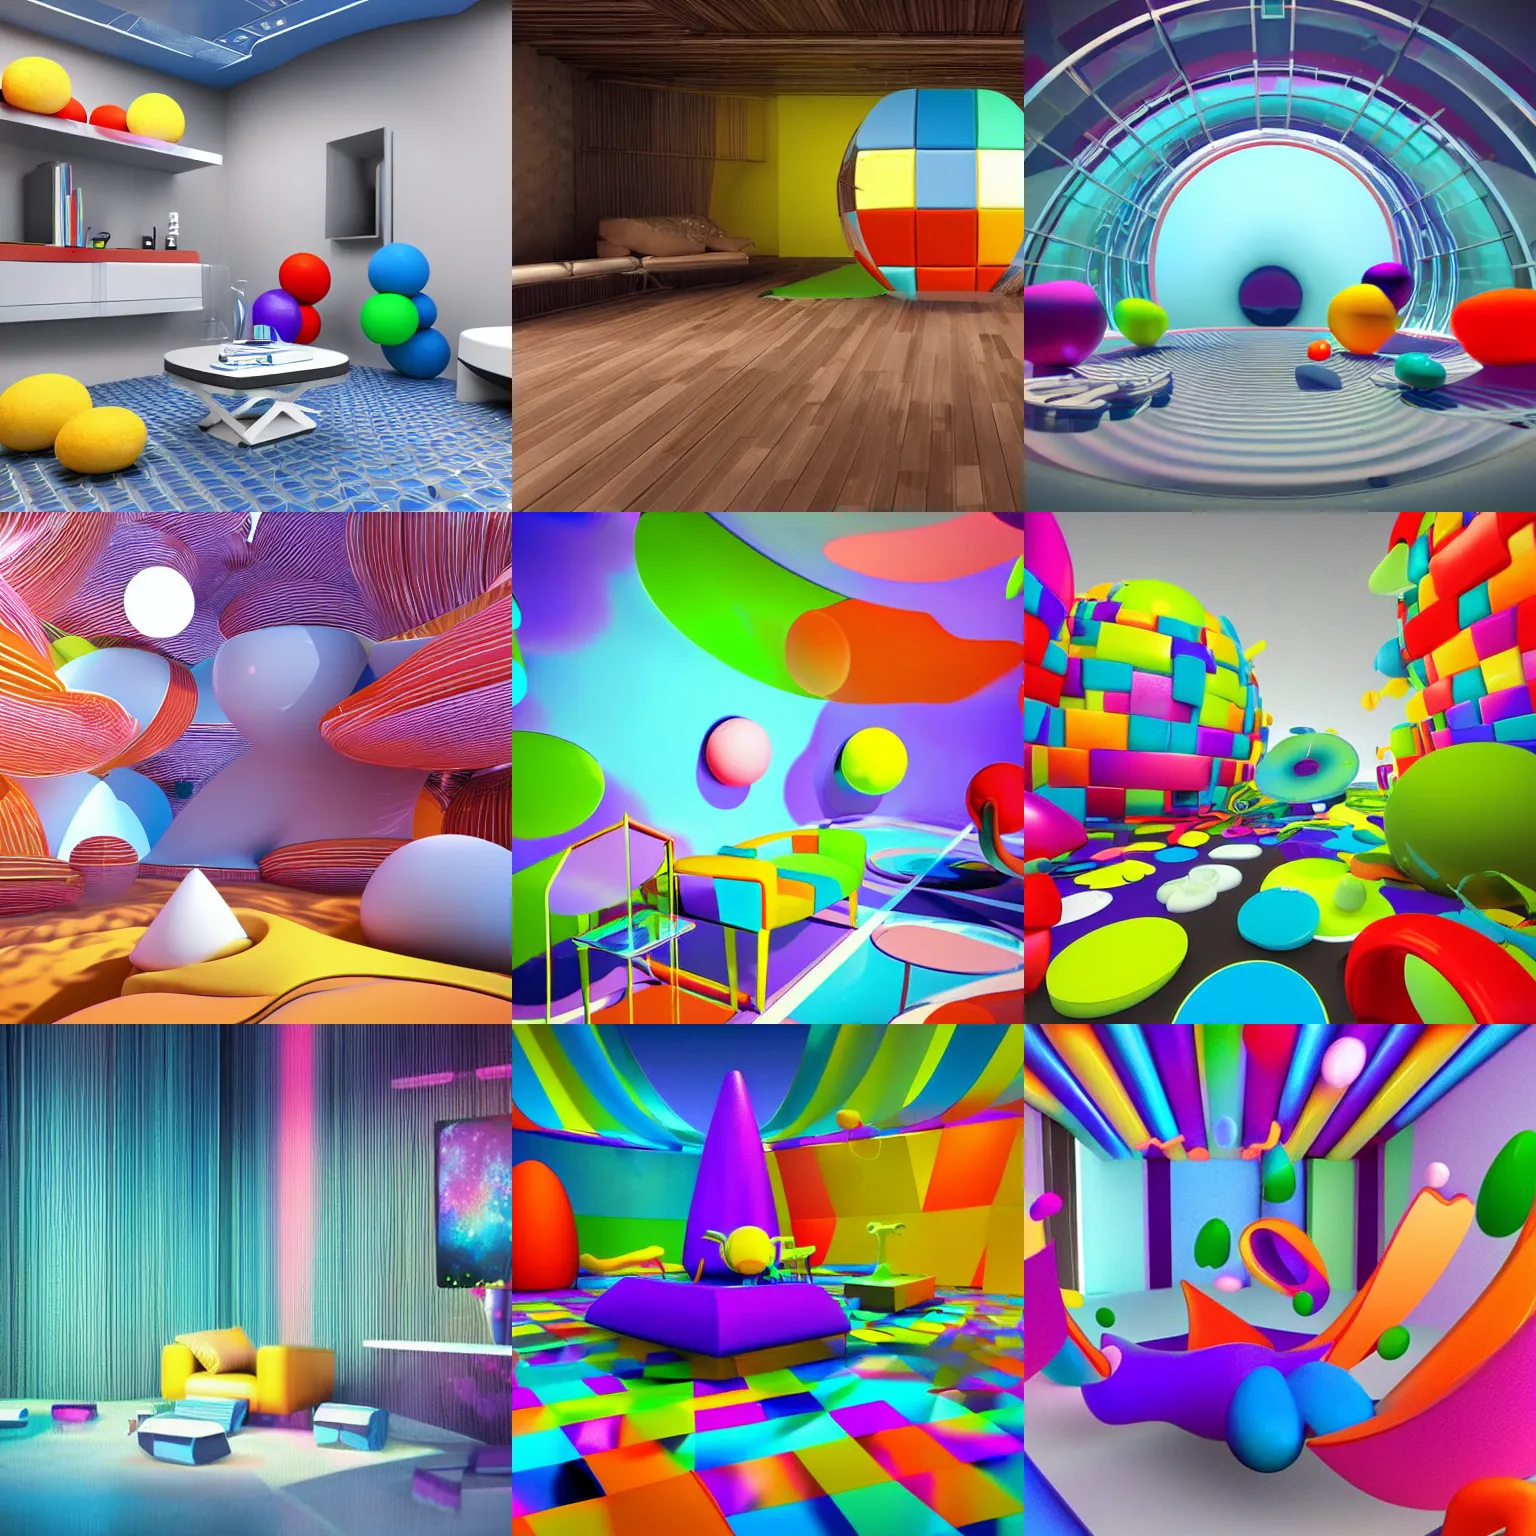 Prompt: clean 2000s 3d render artwork a surreal space filled with colorful objects and shapes